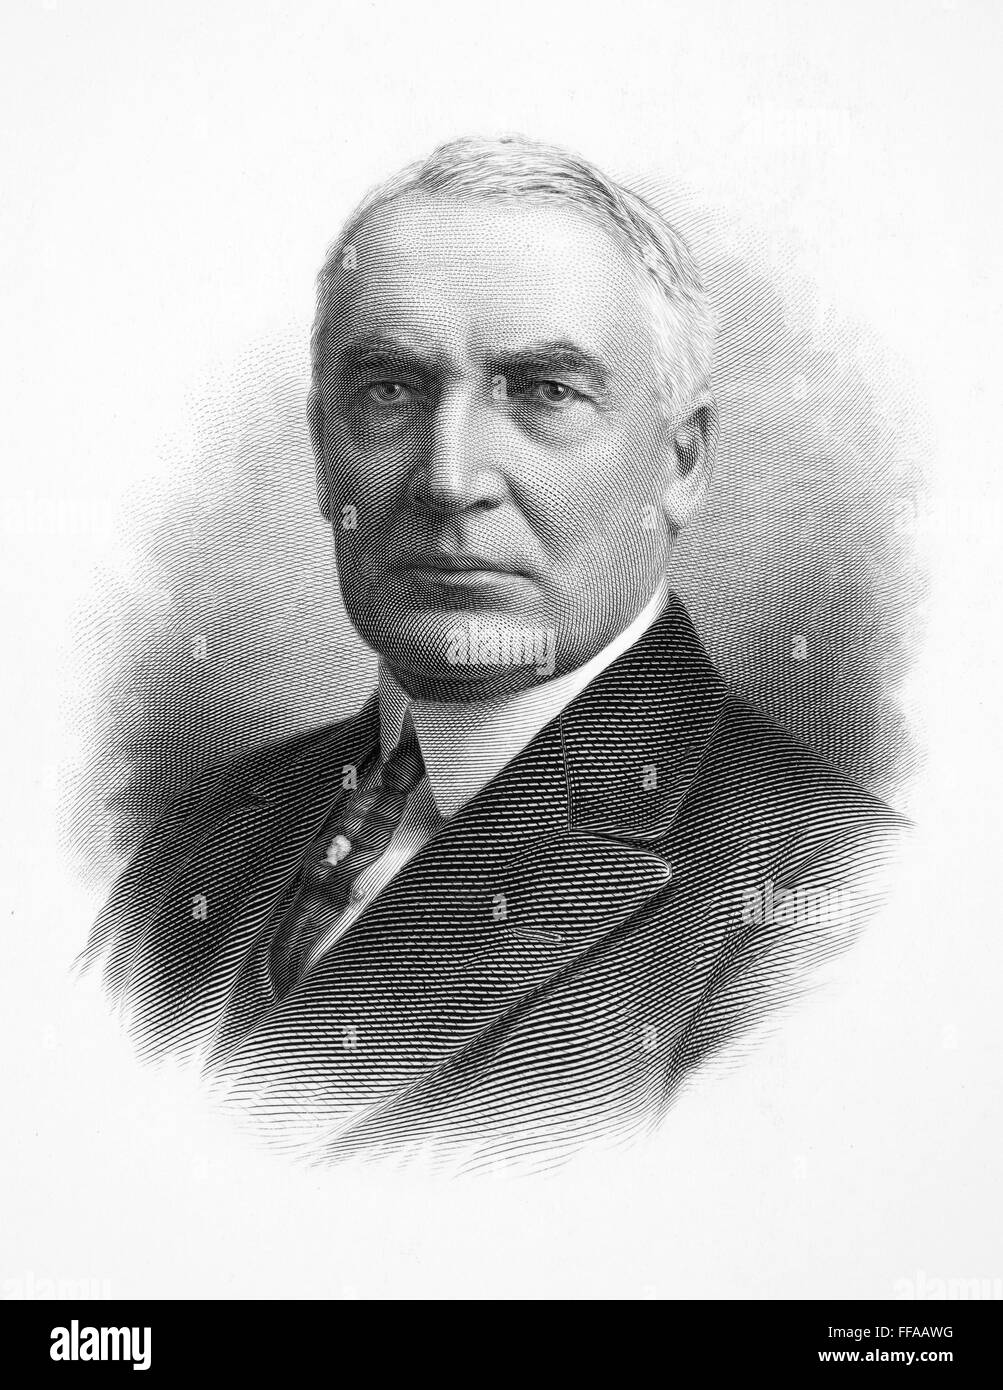 WARREN G. HARDING /n(1865-1923). 29th President of the United States. Steel engraving. Stock Photo